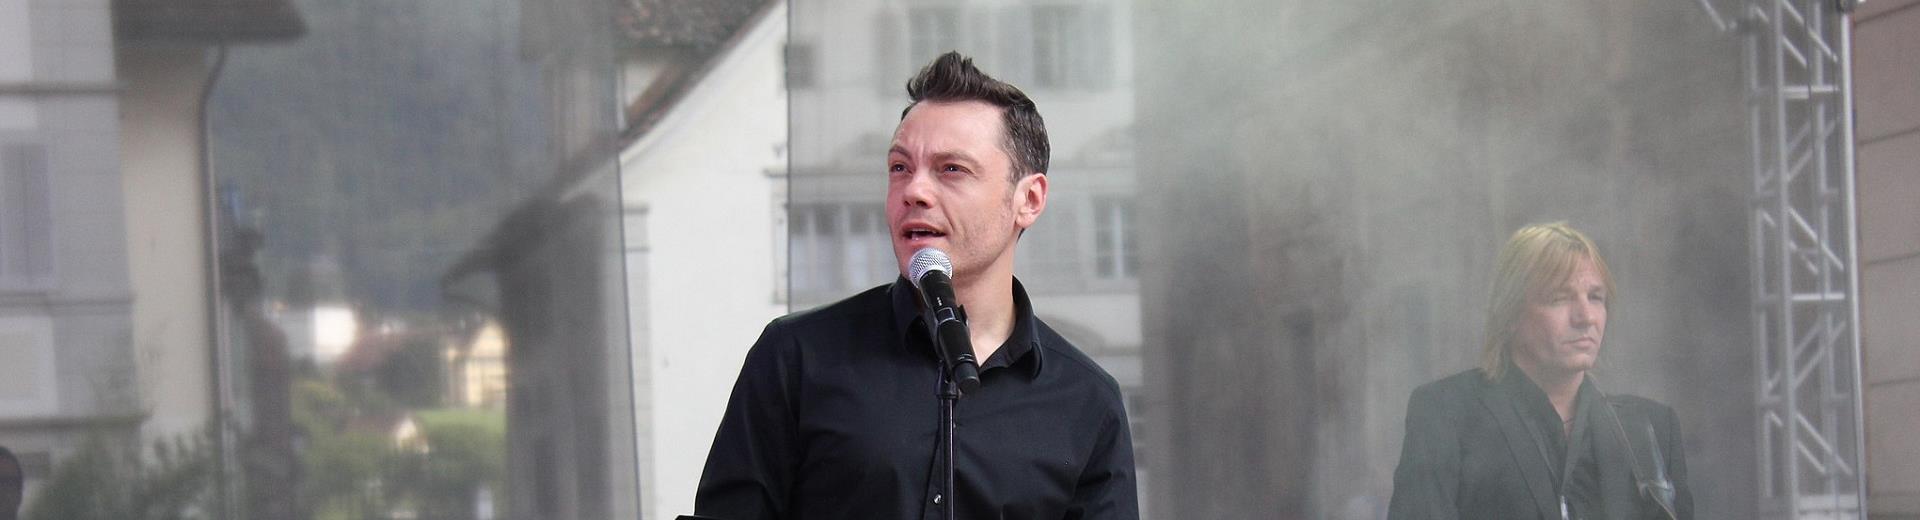 Don''t miss Tiziano Ferro in concert in Milan! Book Hotel Goldenmile Milan now, just minutes from the San Siro stadium, and save up to 30%!